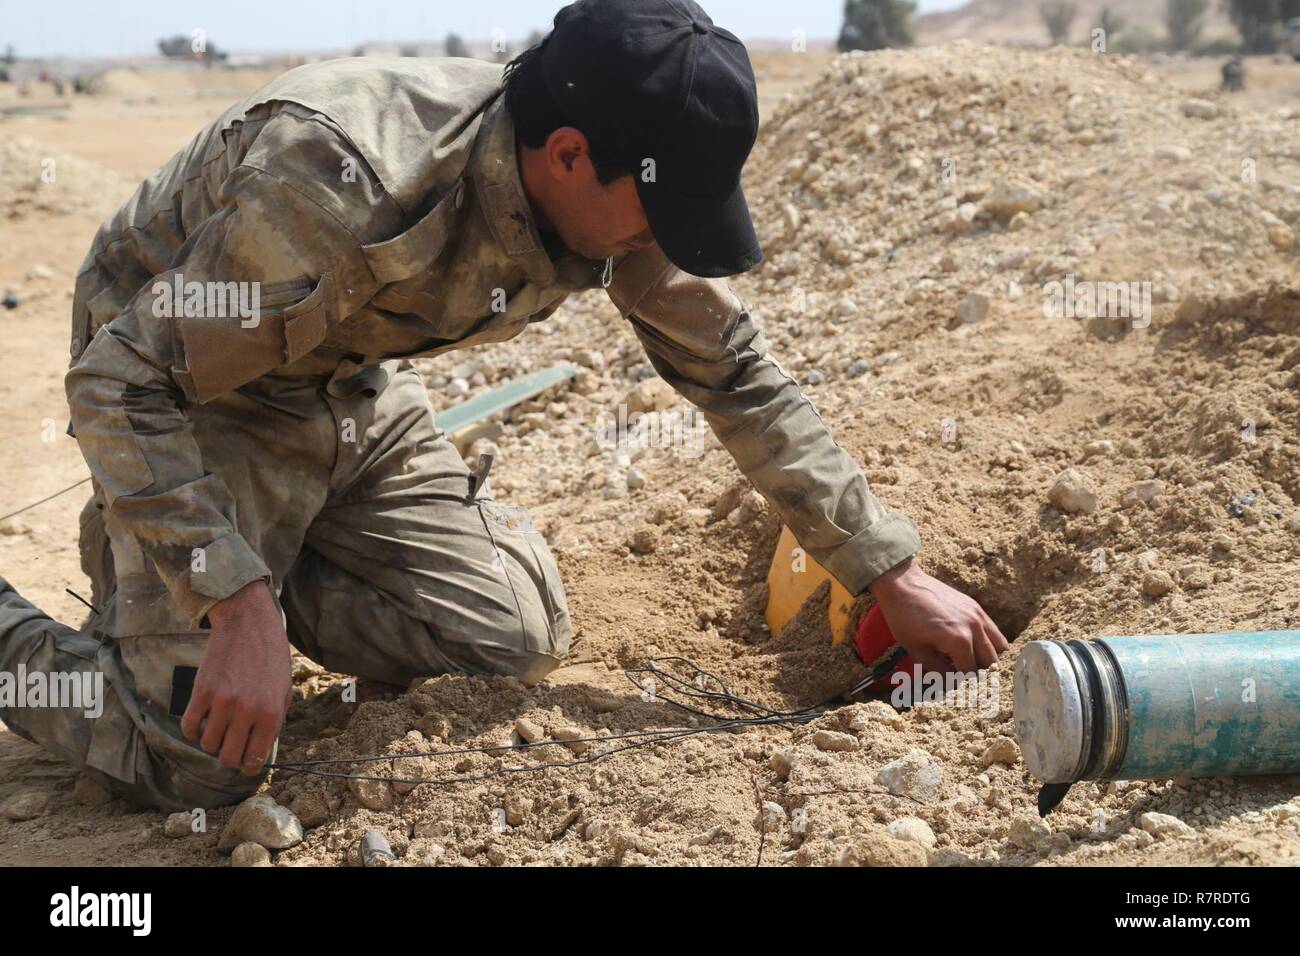 An Iraqi security forces soldier sets up a cutting tool system to safely remove a simulated improvised explosive device during counter-IED training at Al Asad Air Base, Iraq, March 29, 2017. This training is part of the overall Combined Joint Task Force – Operation Inherent Resolve building partner capacity mission by training and improving the capability of partnered forces fighting ISIS. CJTF- OIR is the global Coalition to defeat ISIS in Iraq and Syria. Stock Photo